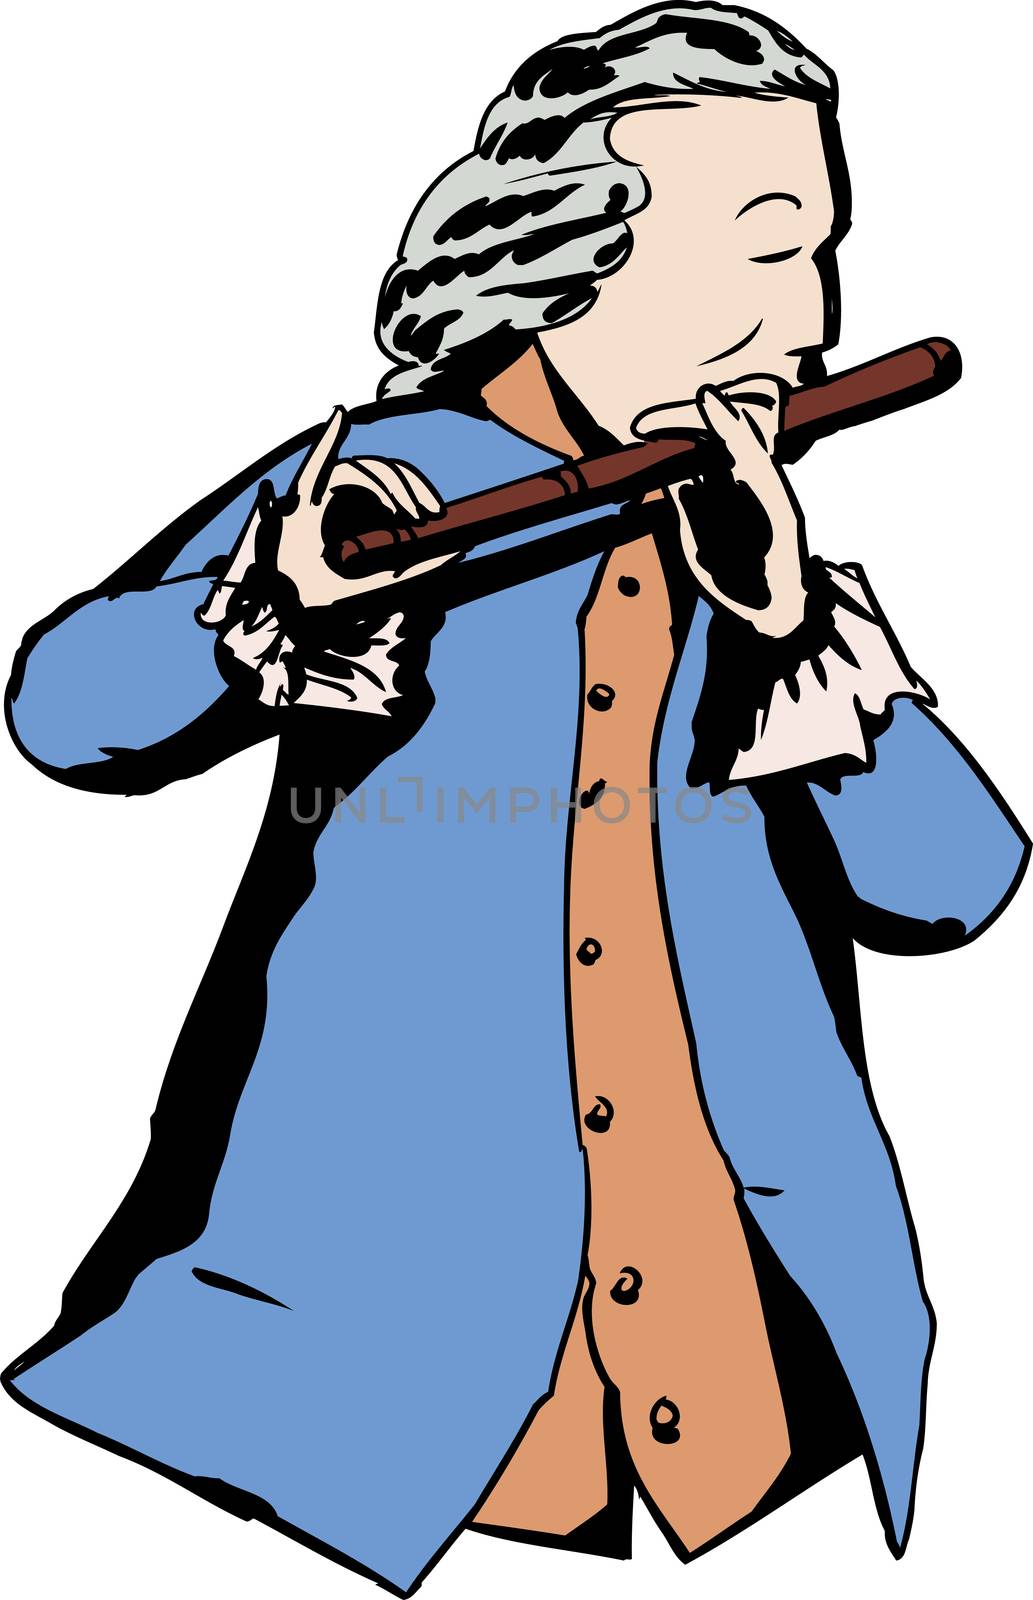 Illustration of single man in 18th century clothing and wig playing a flute